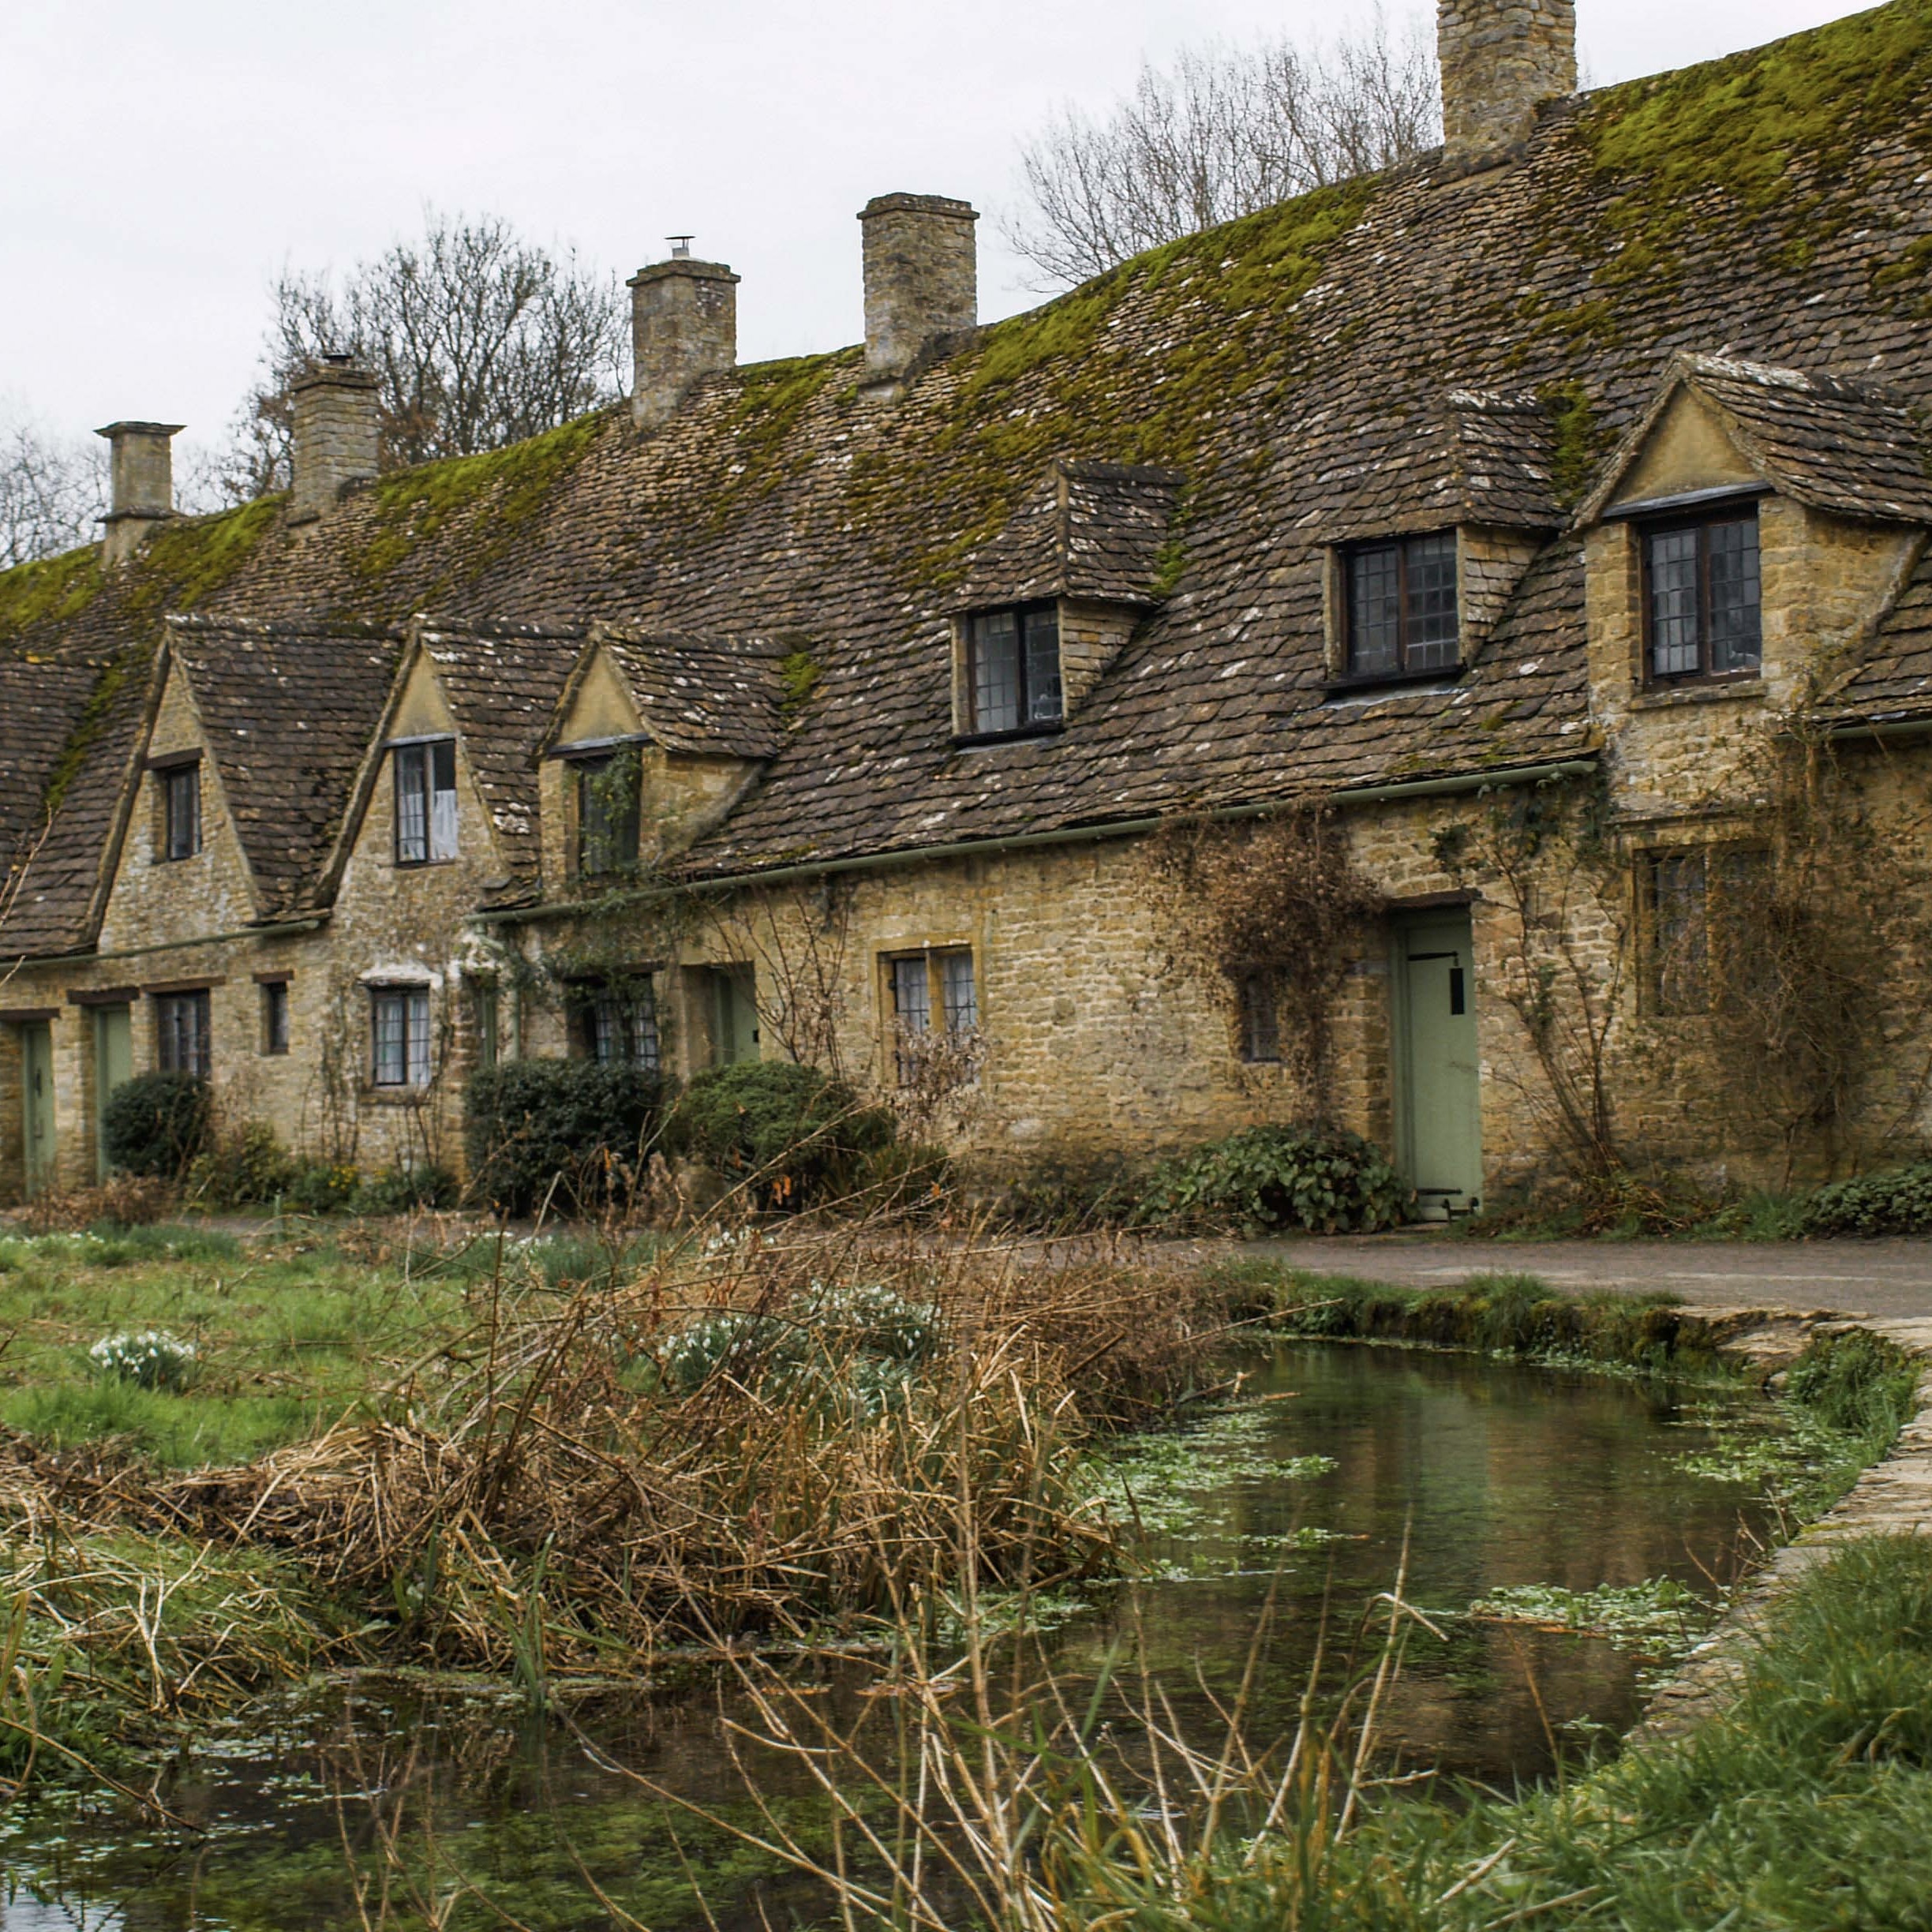 A winter's day in Bibury, Cotswolds